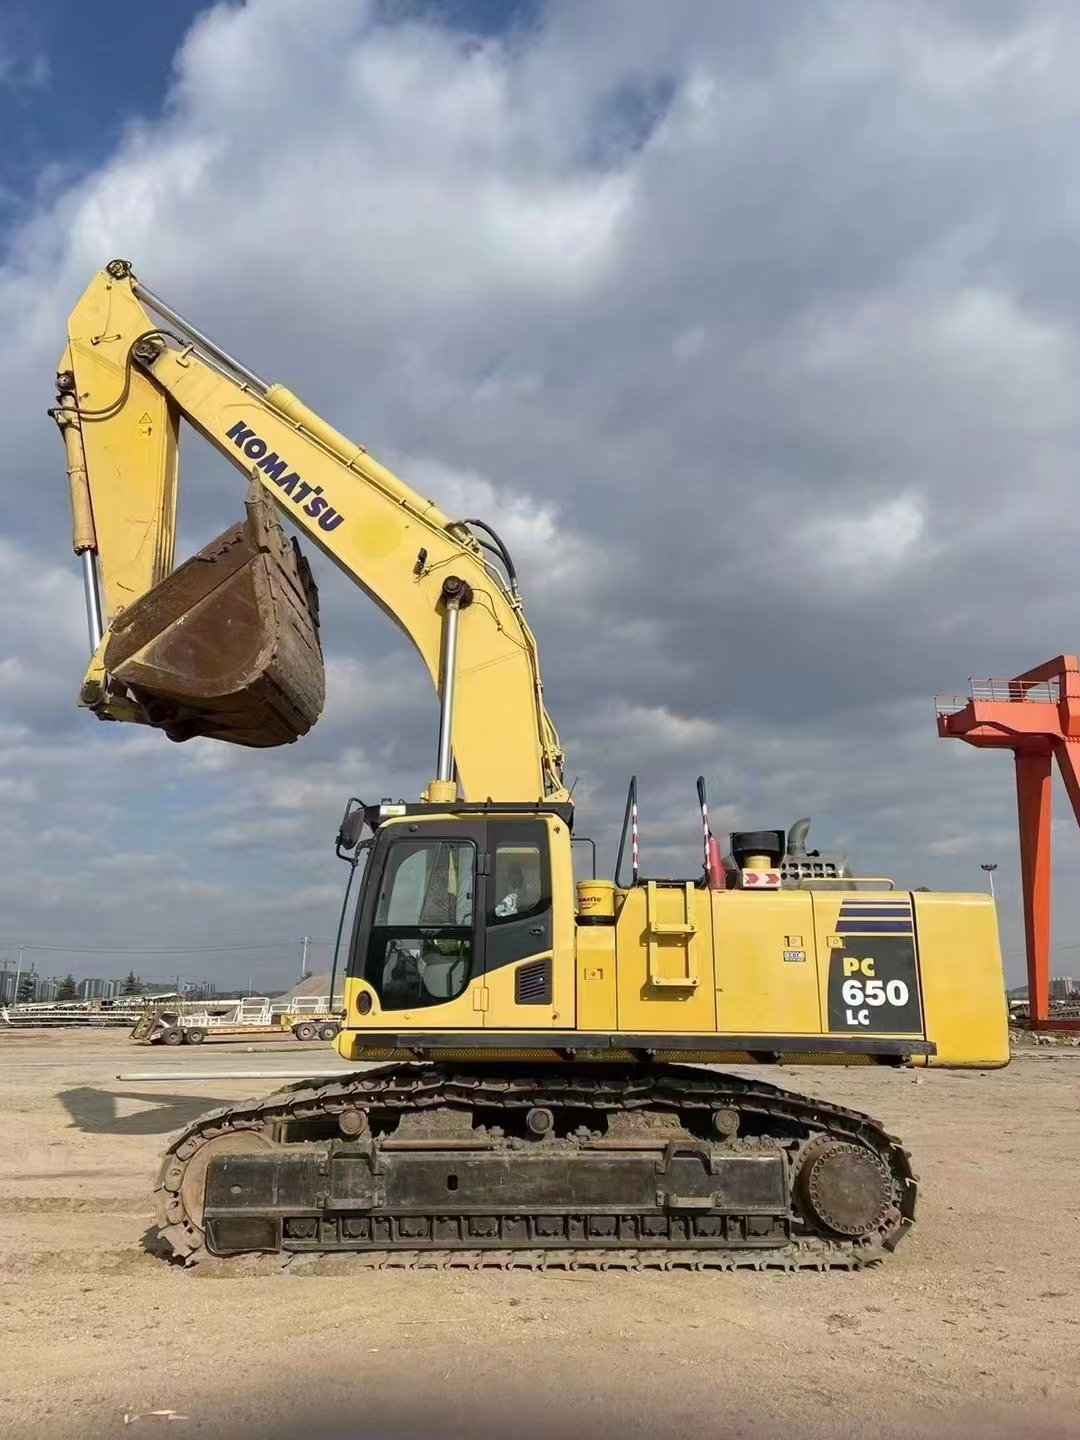 Japan imported 65 tons of second-hand excavator Komatsu PC650 original hydraulic excavator sold at a low price 11